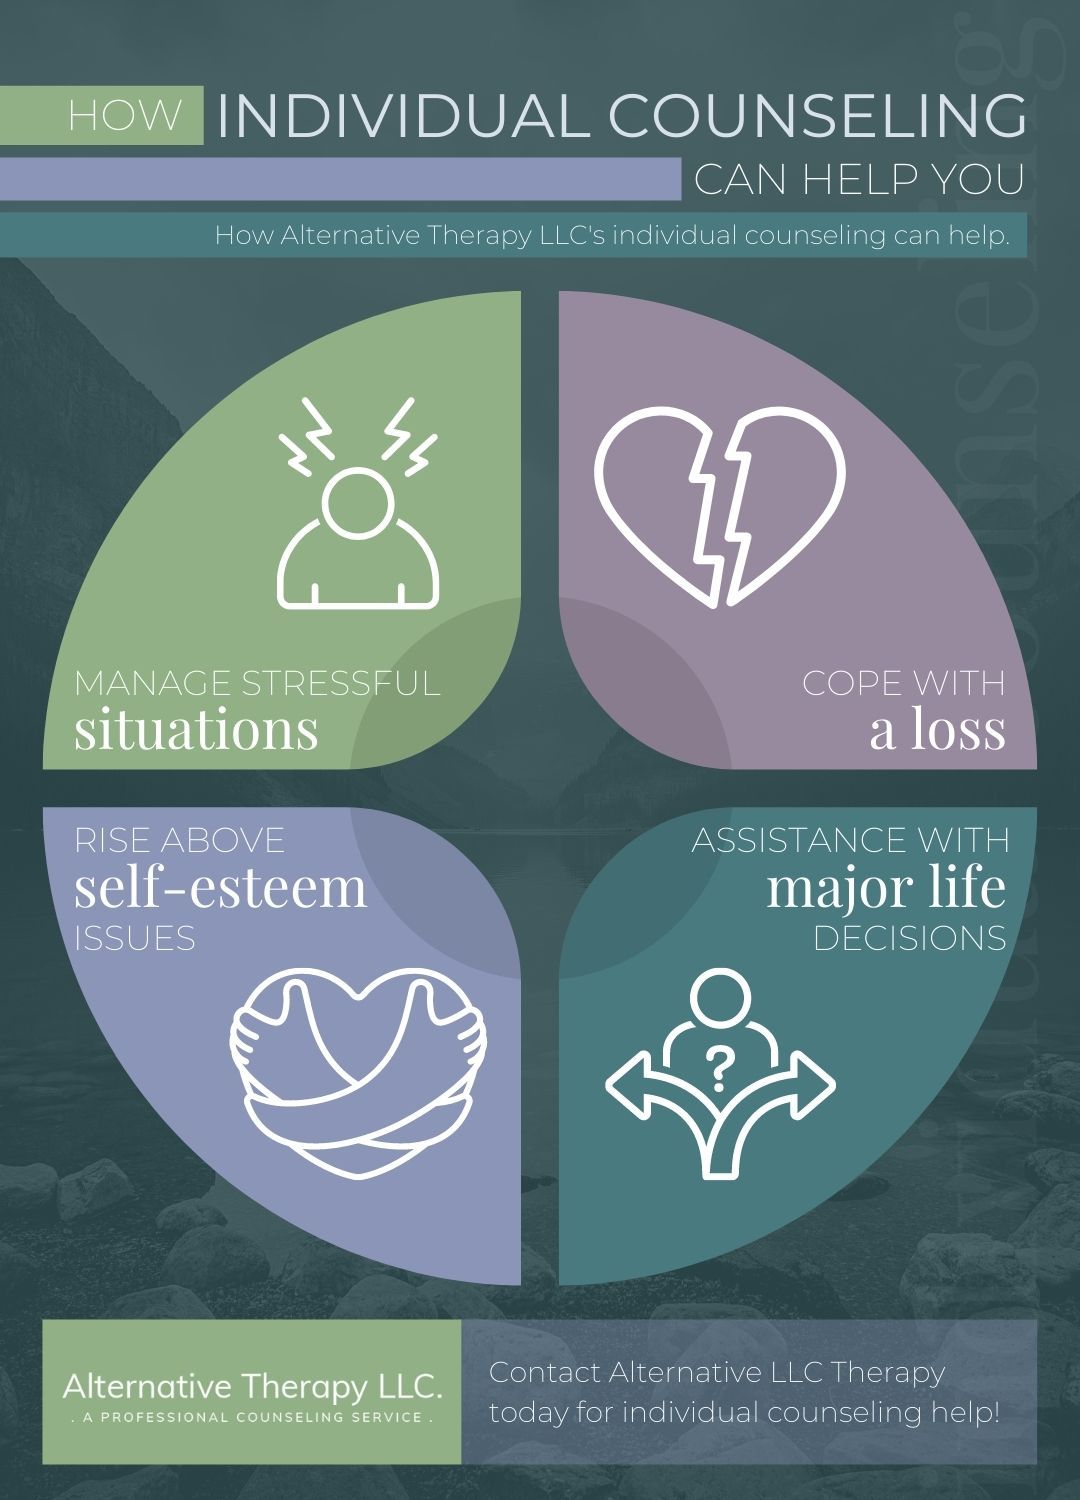 M30570 - Alternative Therapy Individual Counseling infographic.jpg